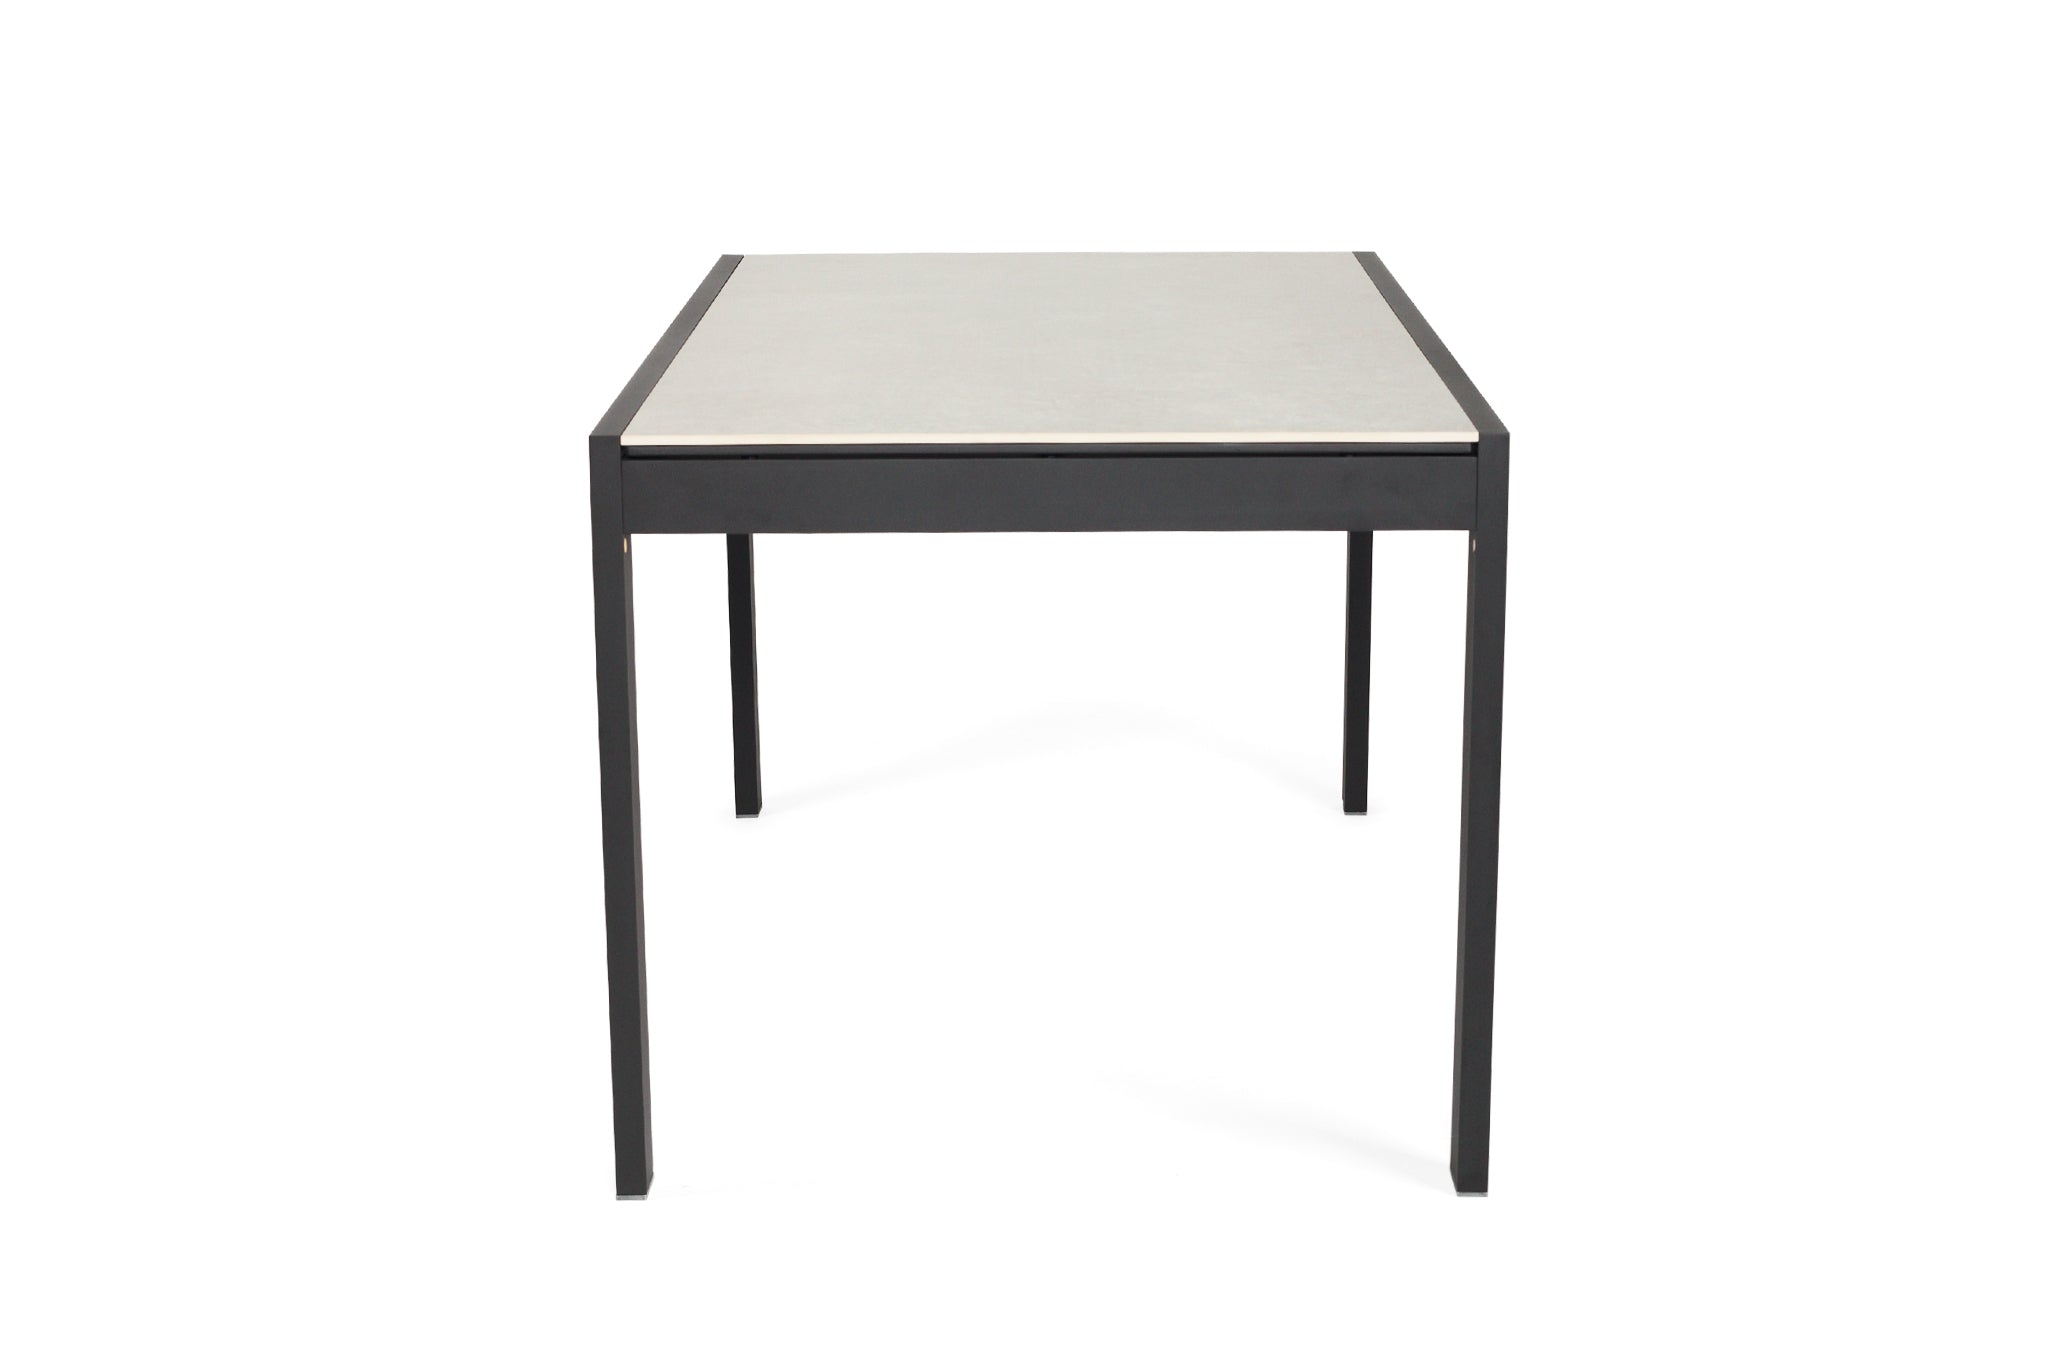 Randy Outdoor Dining Table 160cm – Black